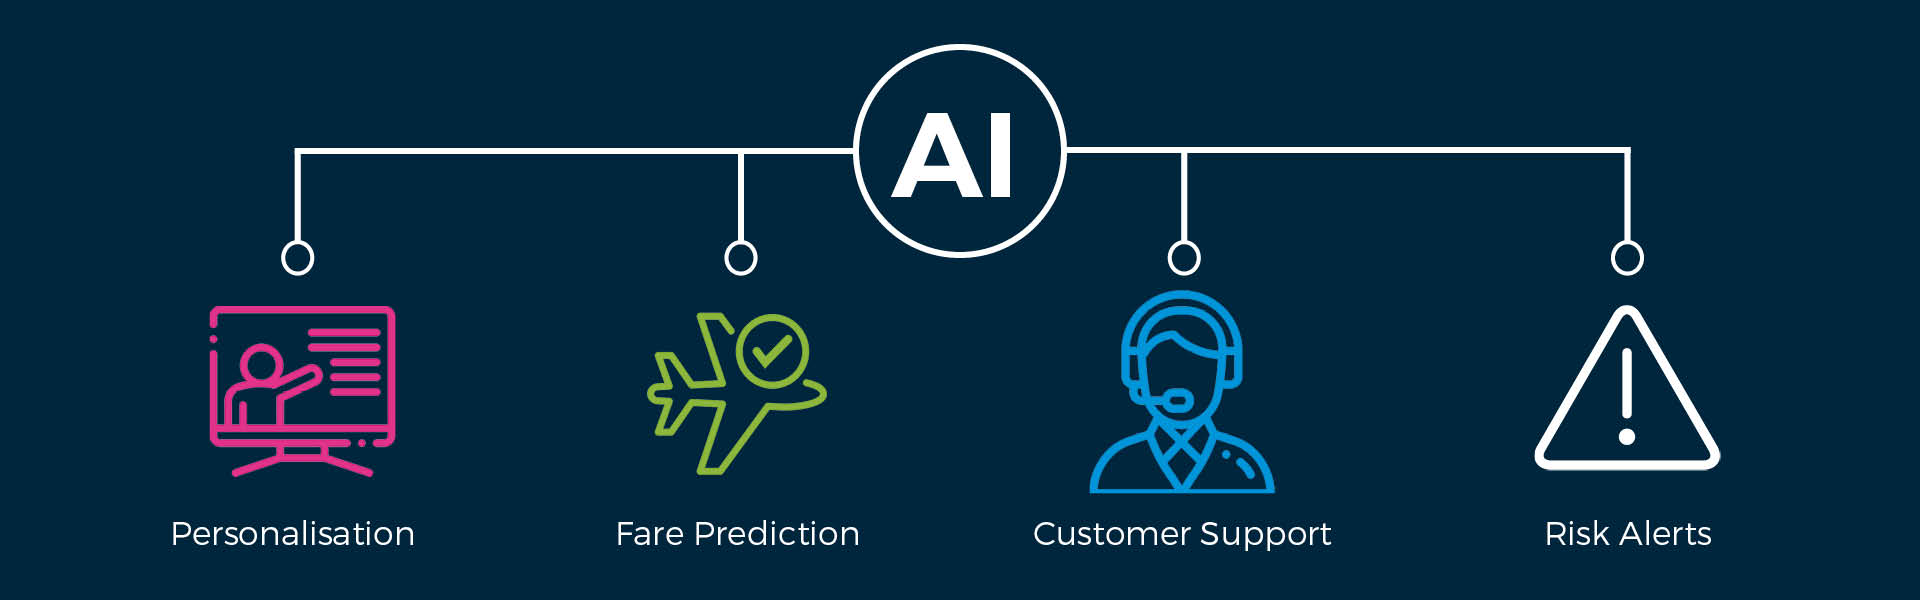 Benefits of AI: Personalisation, Fare Prediction, Customer Support and Risk Alerts